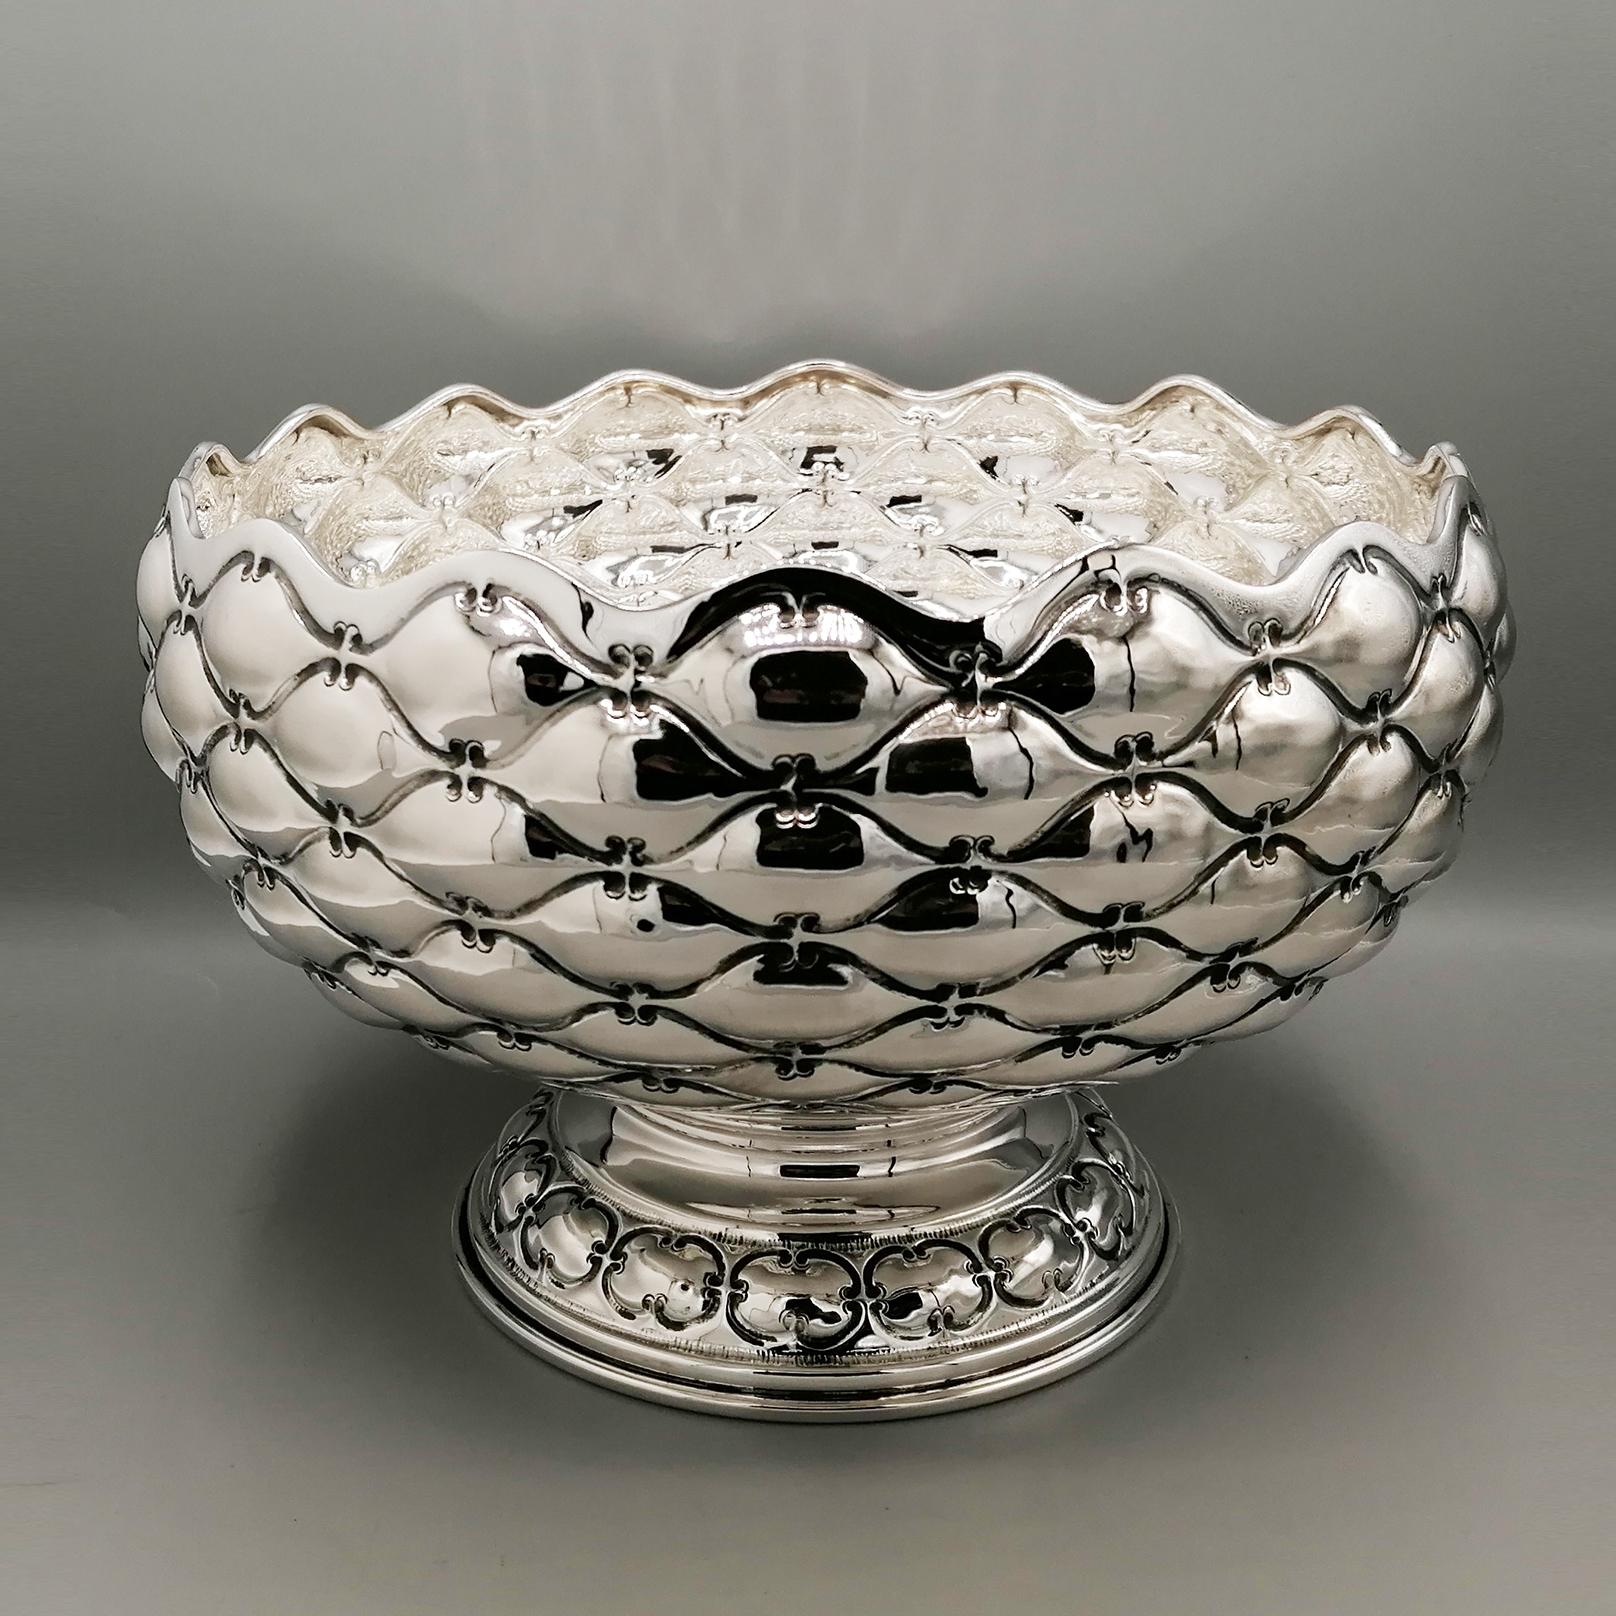 800 silver centerpiece with pineapple design.
The body is rounded with a jagged upper edge on which a smooth edge has been welded as a finish.
Embossments and chisels reminiscent of the pineapple design have been made on the body.
A solid round base